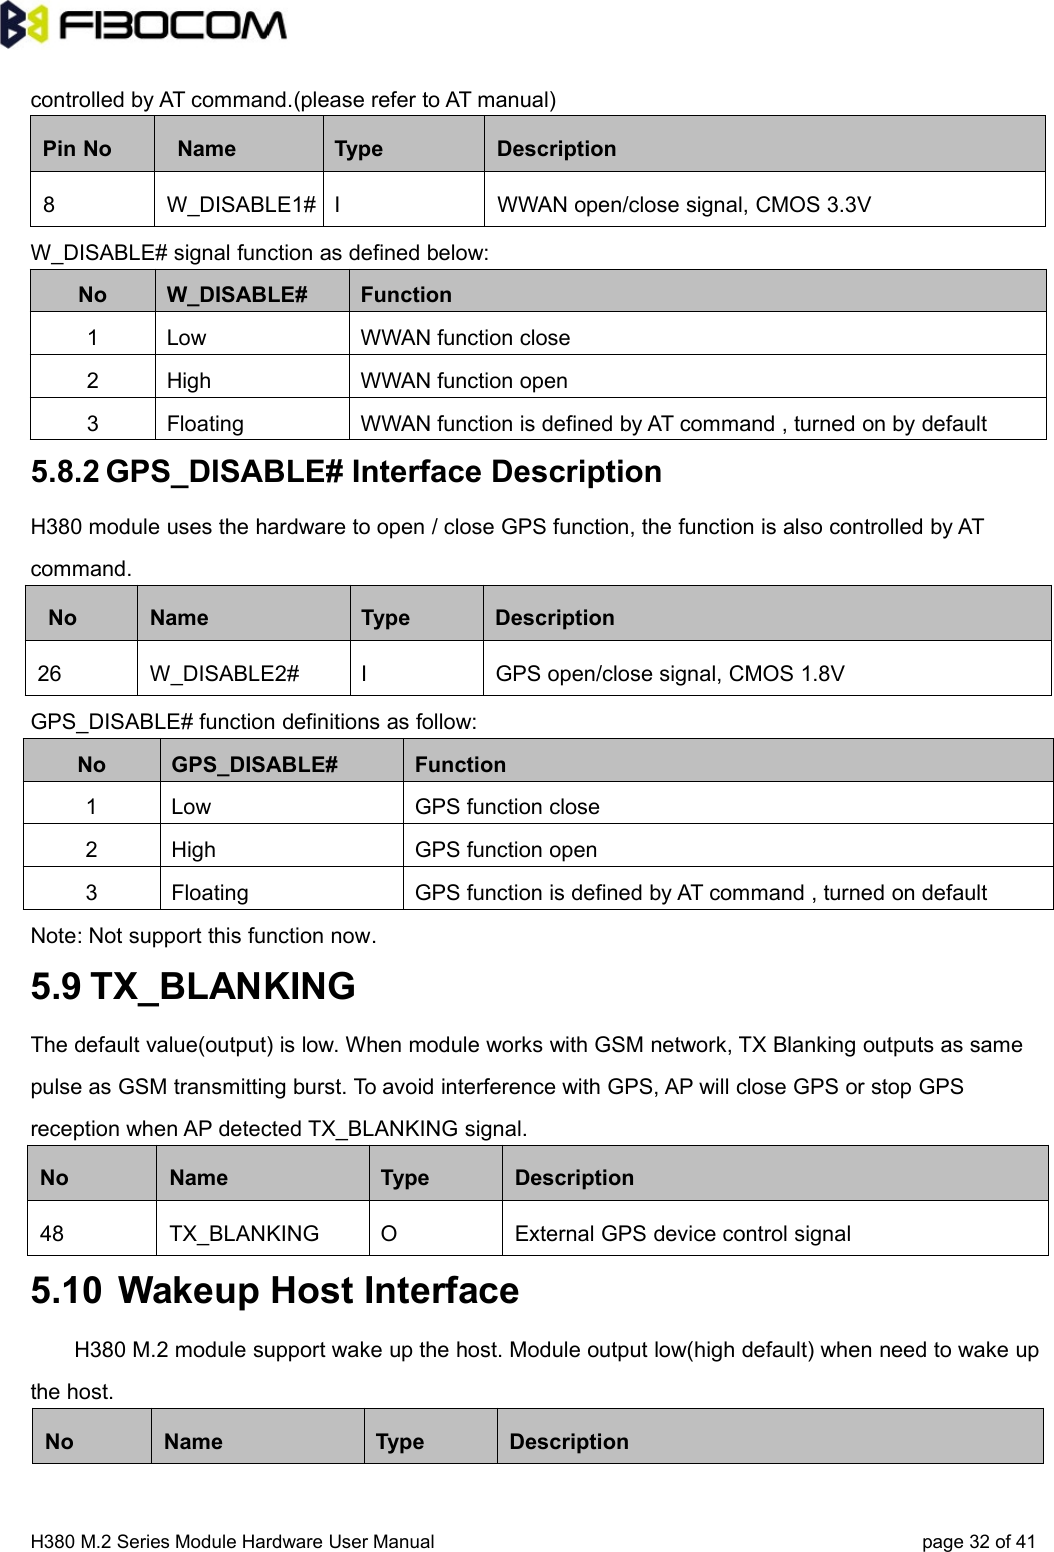 H380 M.2 Series Module Hardware User Manual page 32 of 41controlled by AT command.(please refer to AT manual)Pin No Name Type Description8 W_DISABLE1# I WWAN open/close signal, CMOS 3.3VW_DISABLE# signal function as defined below:No W_DISABLE# Function1 Low WWAN function close2 High WWAN function open3 Floating WWAN function is defined by AT command , turned on by default5.8.2 GPS_DISABLE# Interface DescriptionH380 module uses the hardware to open / close GPS function, the function is also controlled by ATcommand.No Name Type Description26 W_DISABLE2# I GPS open/close signal, CMOS 1.8VGPS_DISABLE# function definitions as follow:No GPS_DISABLE# Function1 Low GPS function close2 High GPS function open3 Floating GPS function is defined by AT command , turned on defaultNote: Not support this function now.5.9 TX_BLANKINGThe default value(output) is low. When module works with GSM network, TX Blanking outputs as samepulse as GSM transmitting burst. To avoid interference with GPS, AP will close GPS or stop GPSreception when AP detected TX_BLANKING signal.No Name Type Description48 TX_BLANKING O External GPS device control signal5.10 Wakeup Host InterfaceH380 M.2 module support wake up the host. Module output low(high default) when need to wake upthe host.No Name Type Description